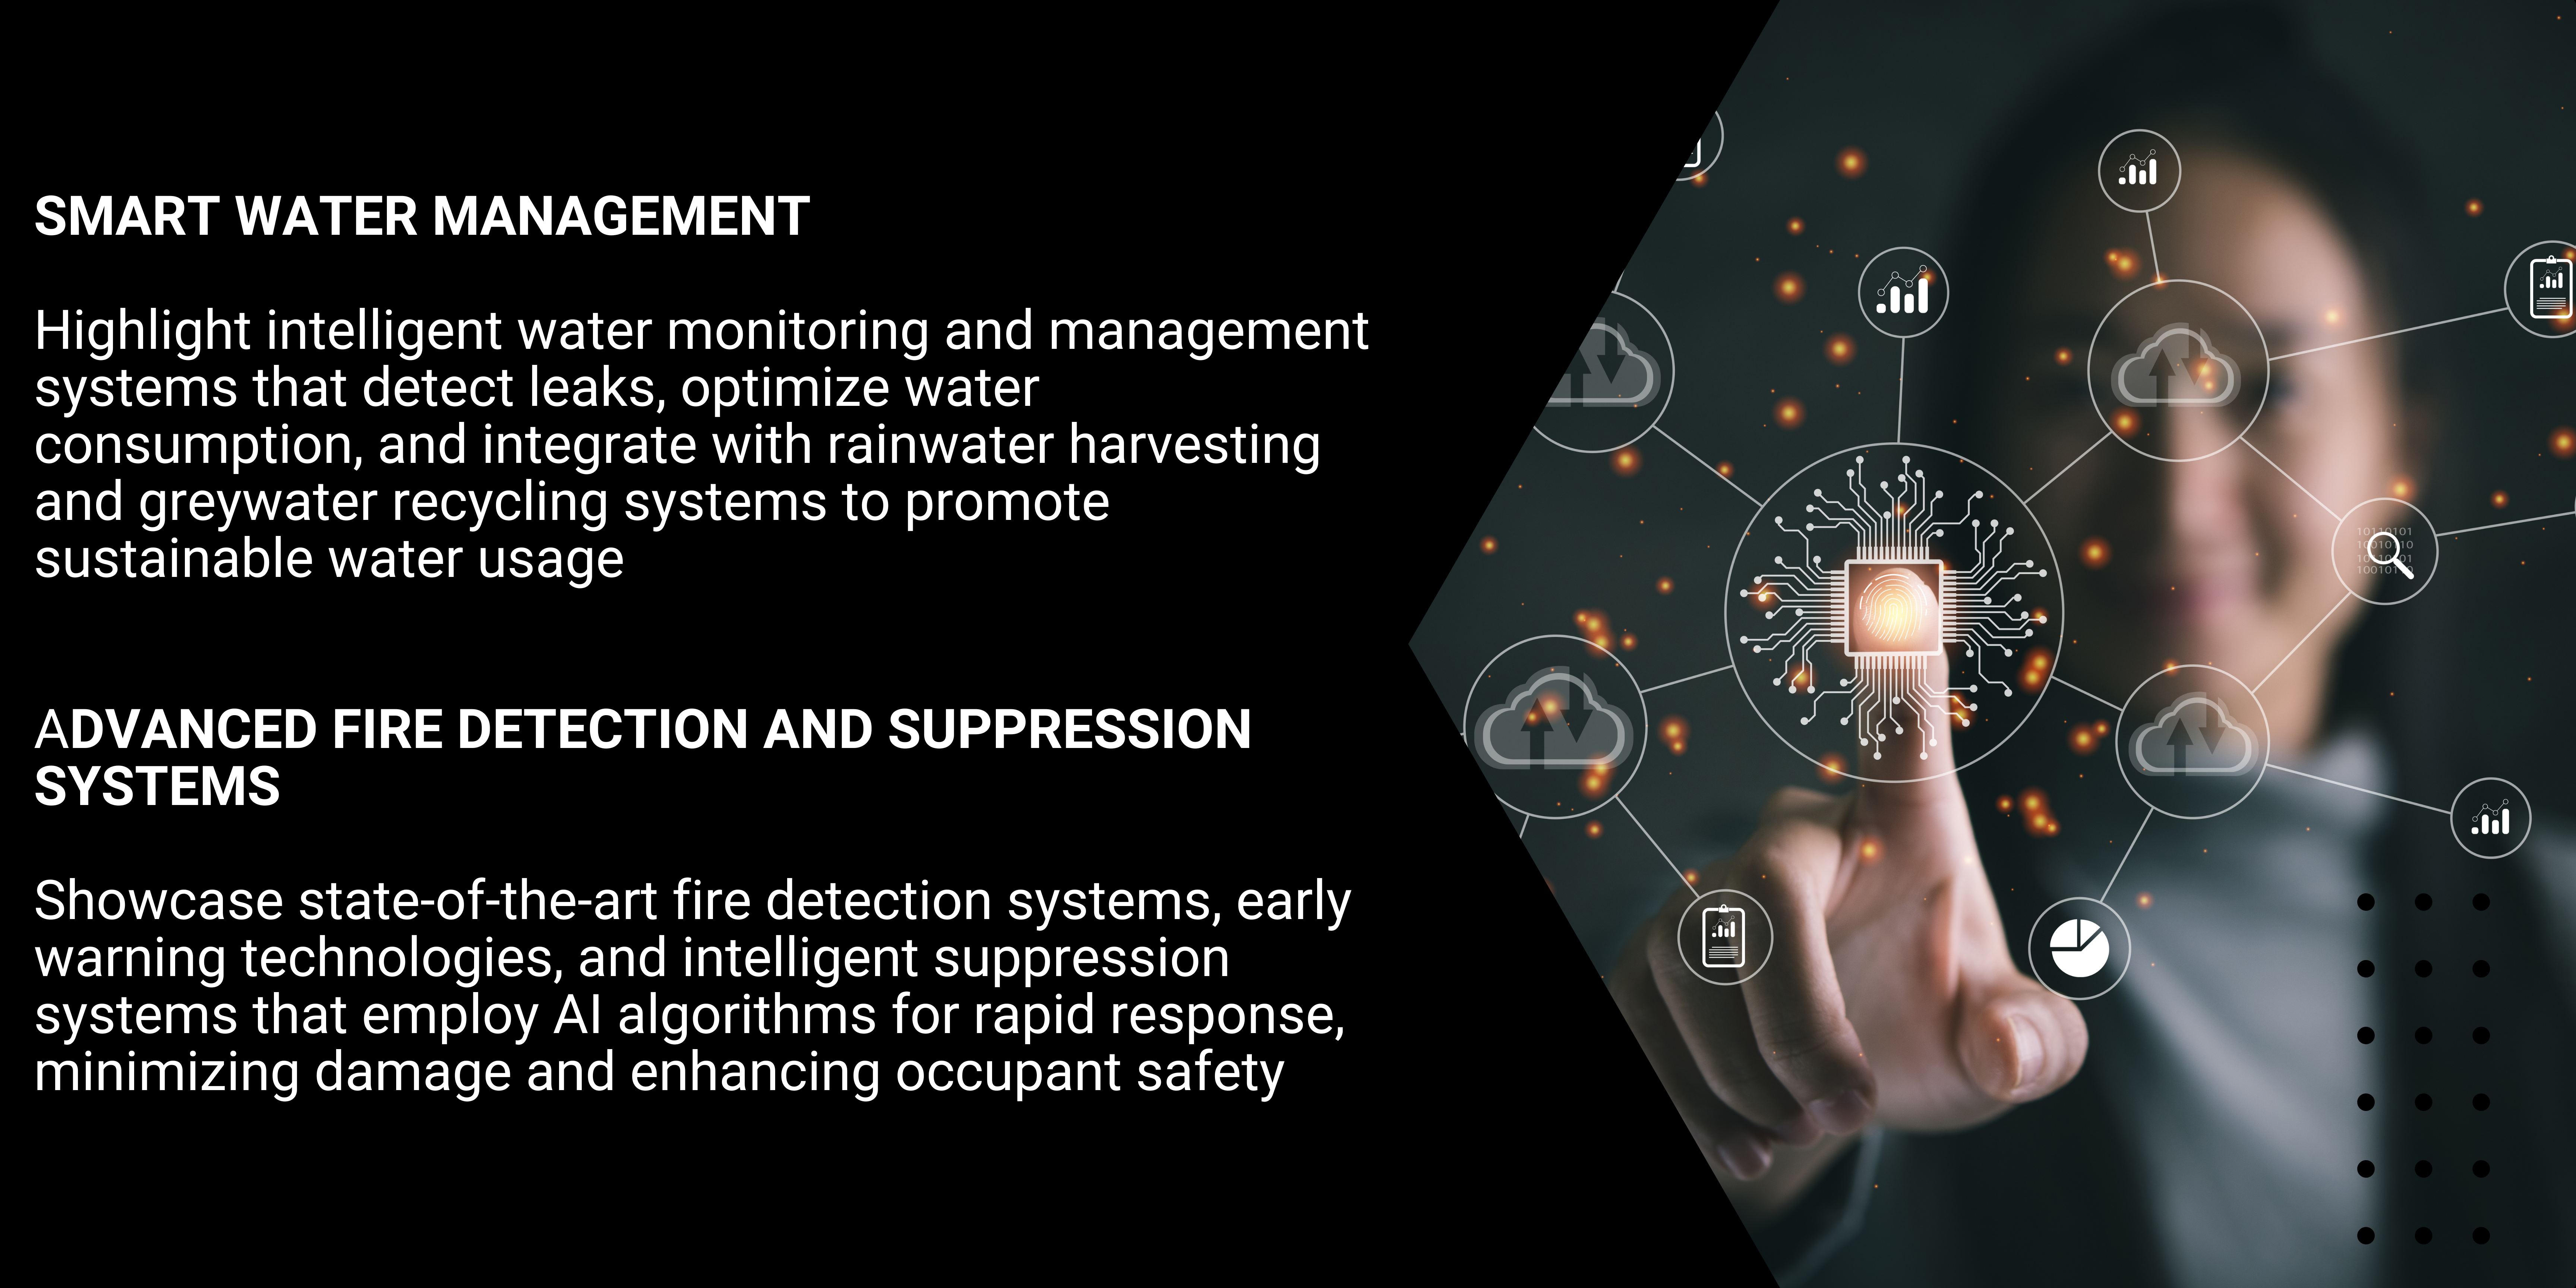 Smart Water Management and Advanced Fire Detection and Suppression Systems